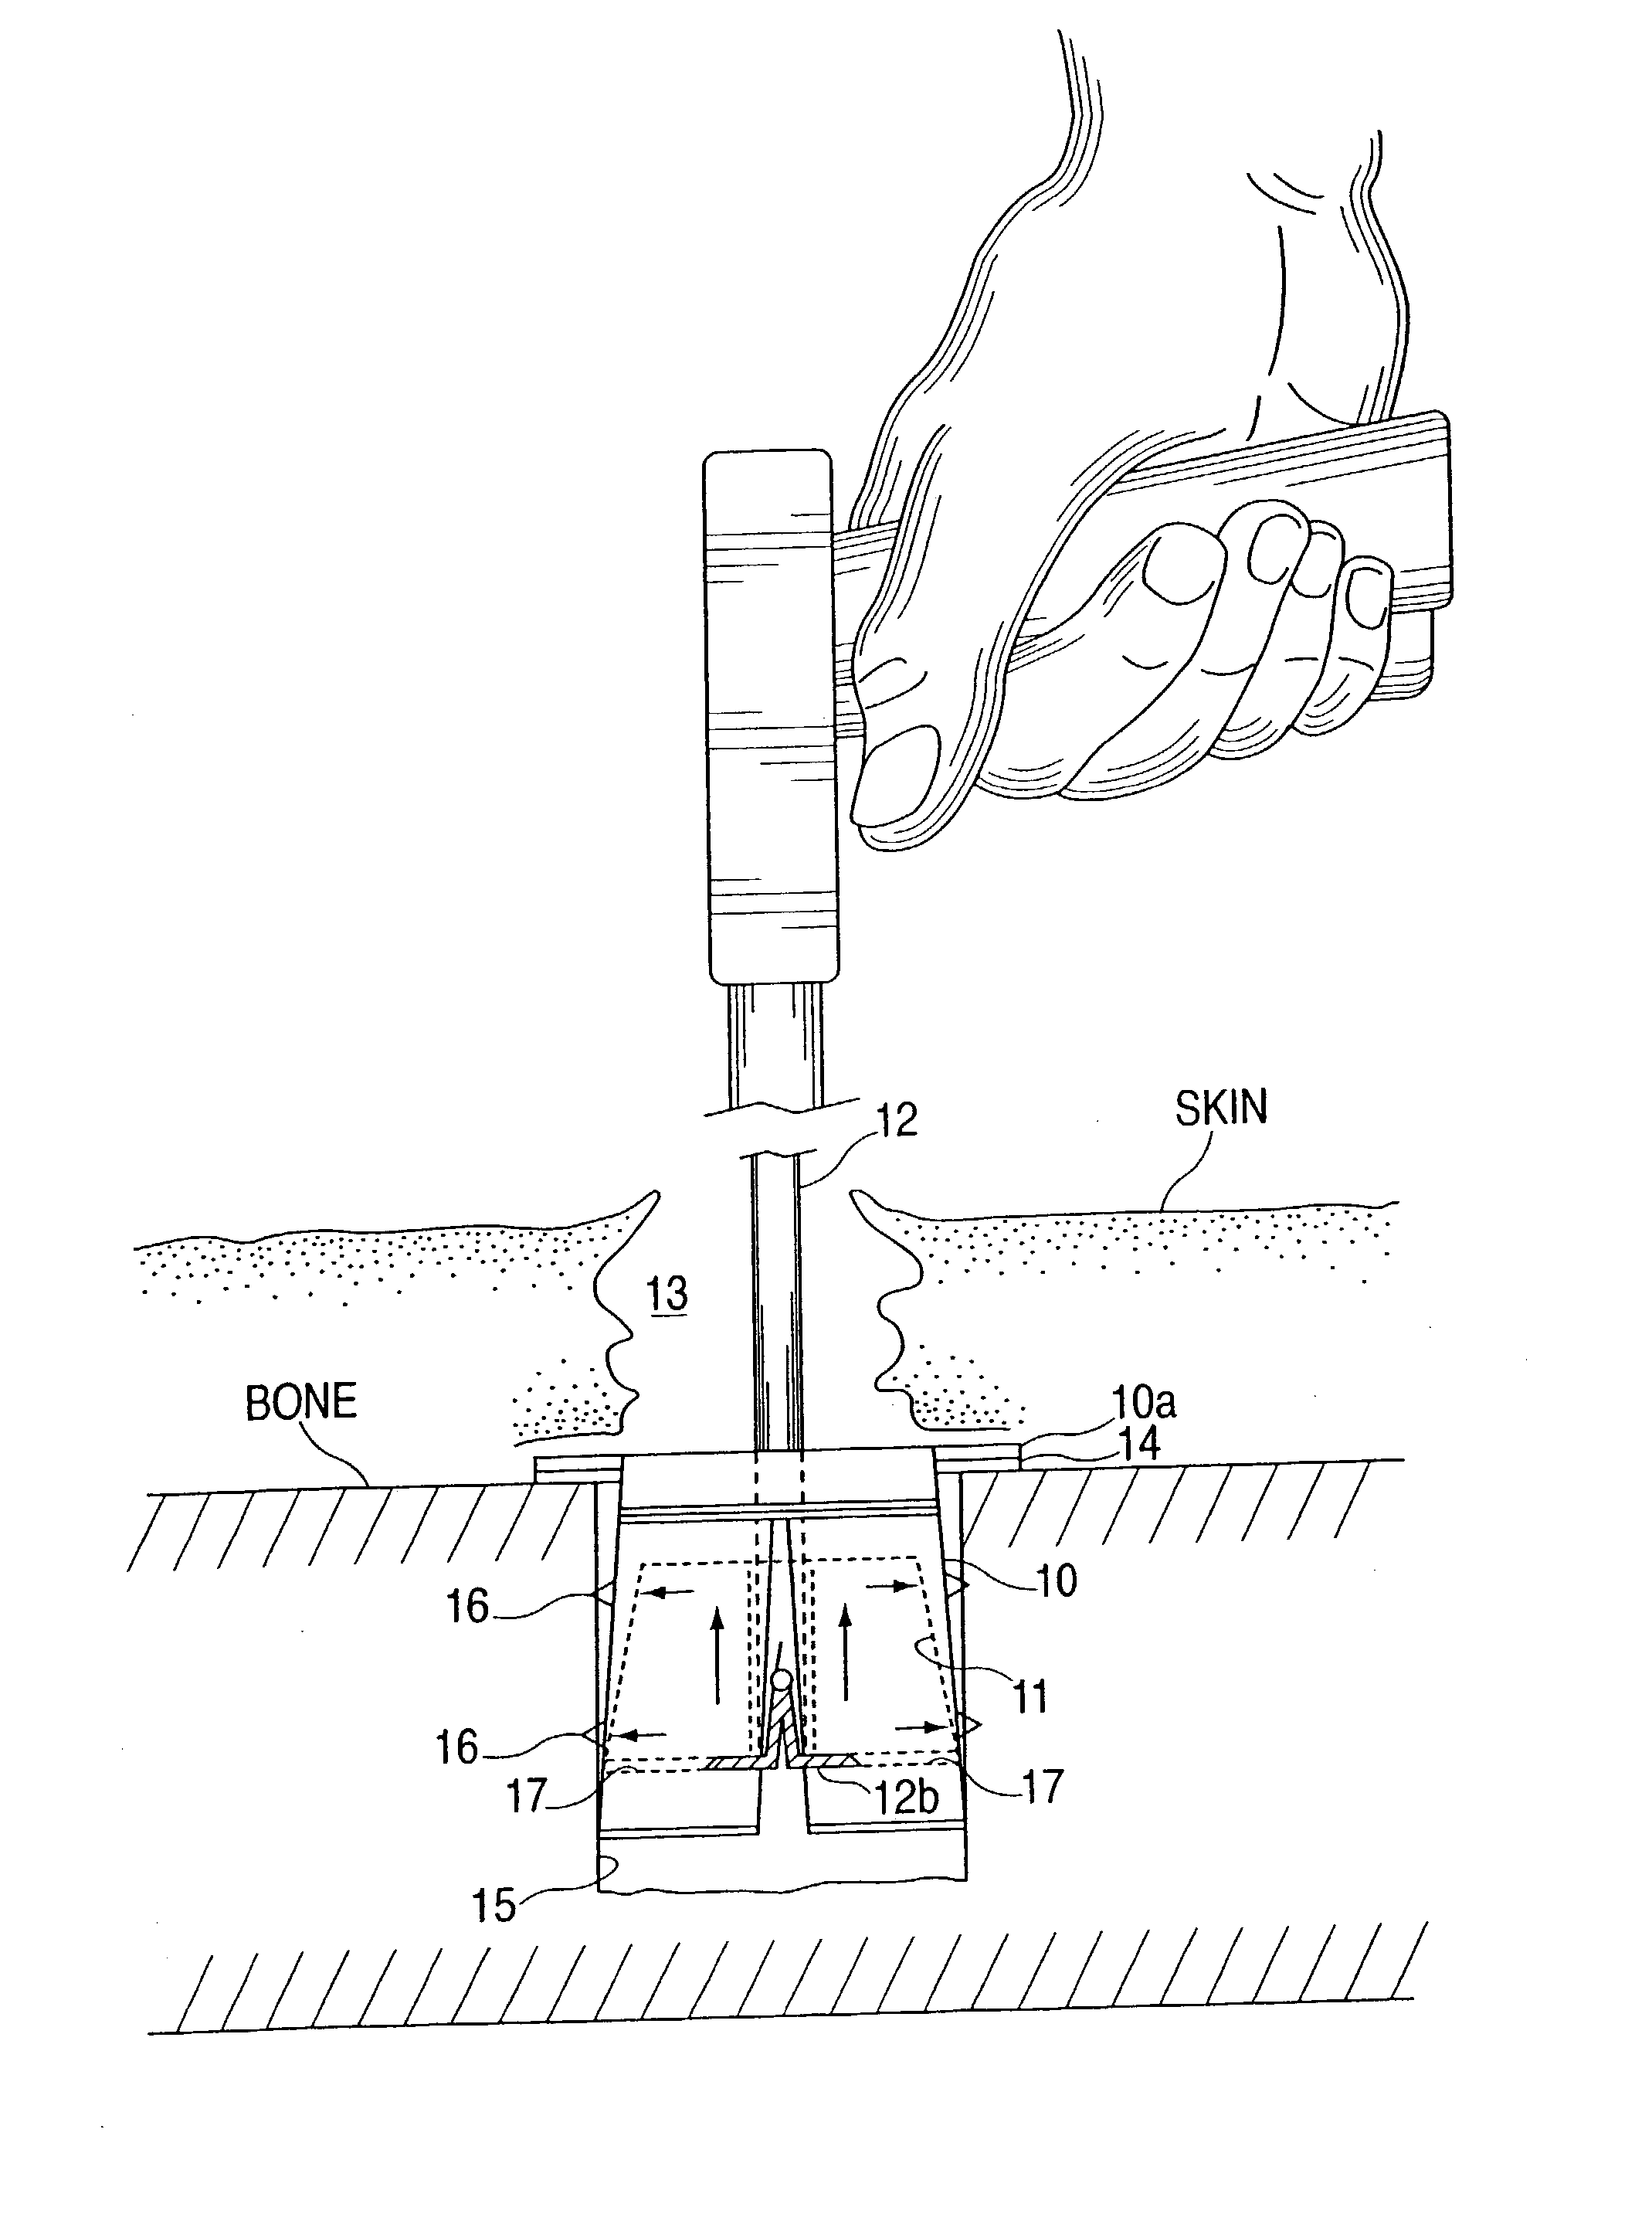 Device for installing an anchor in a bone